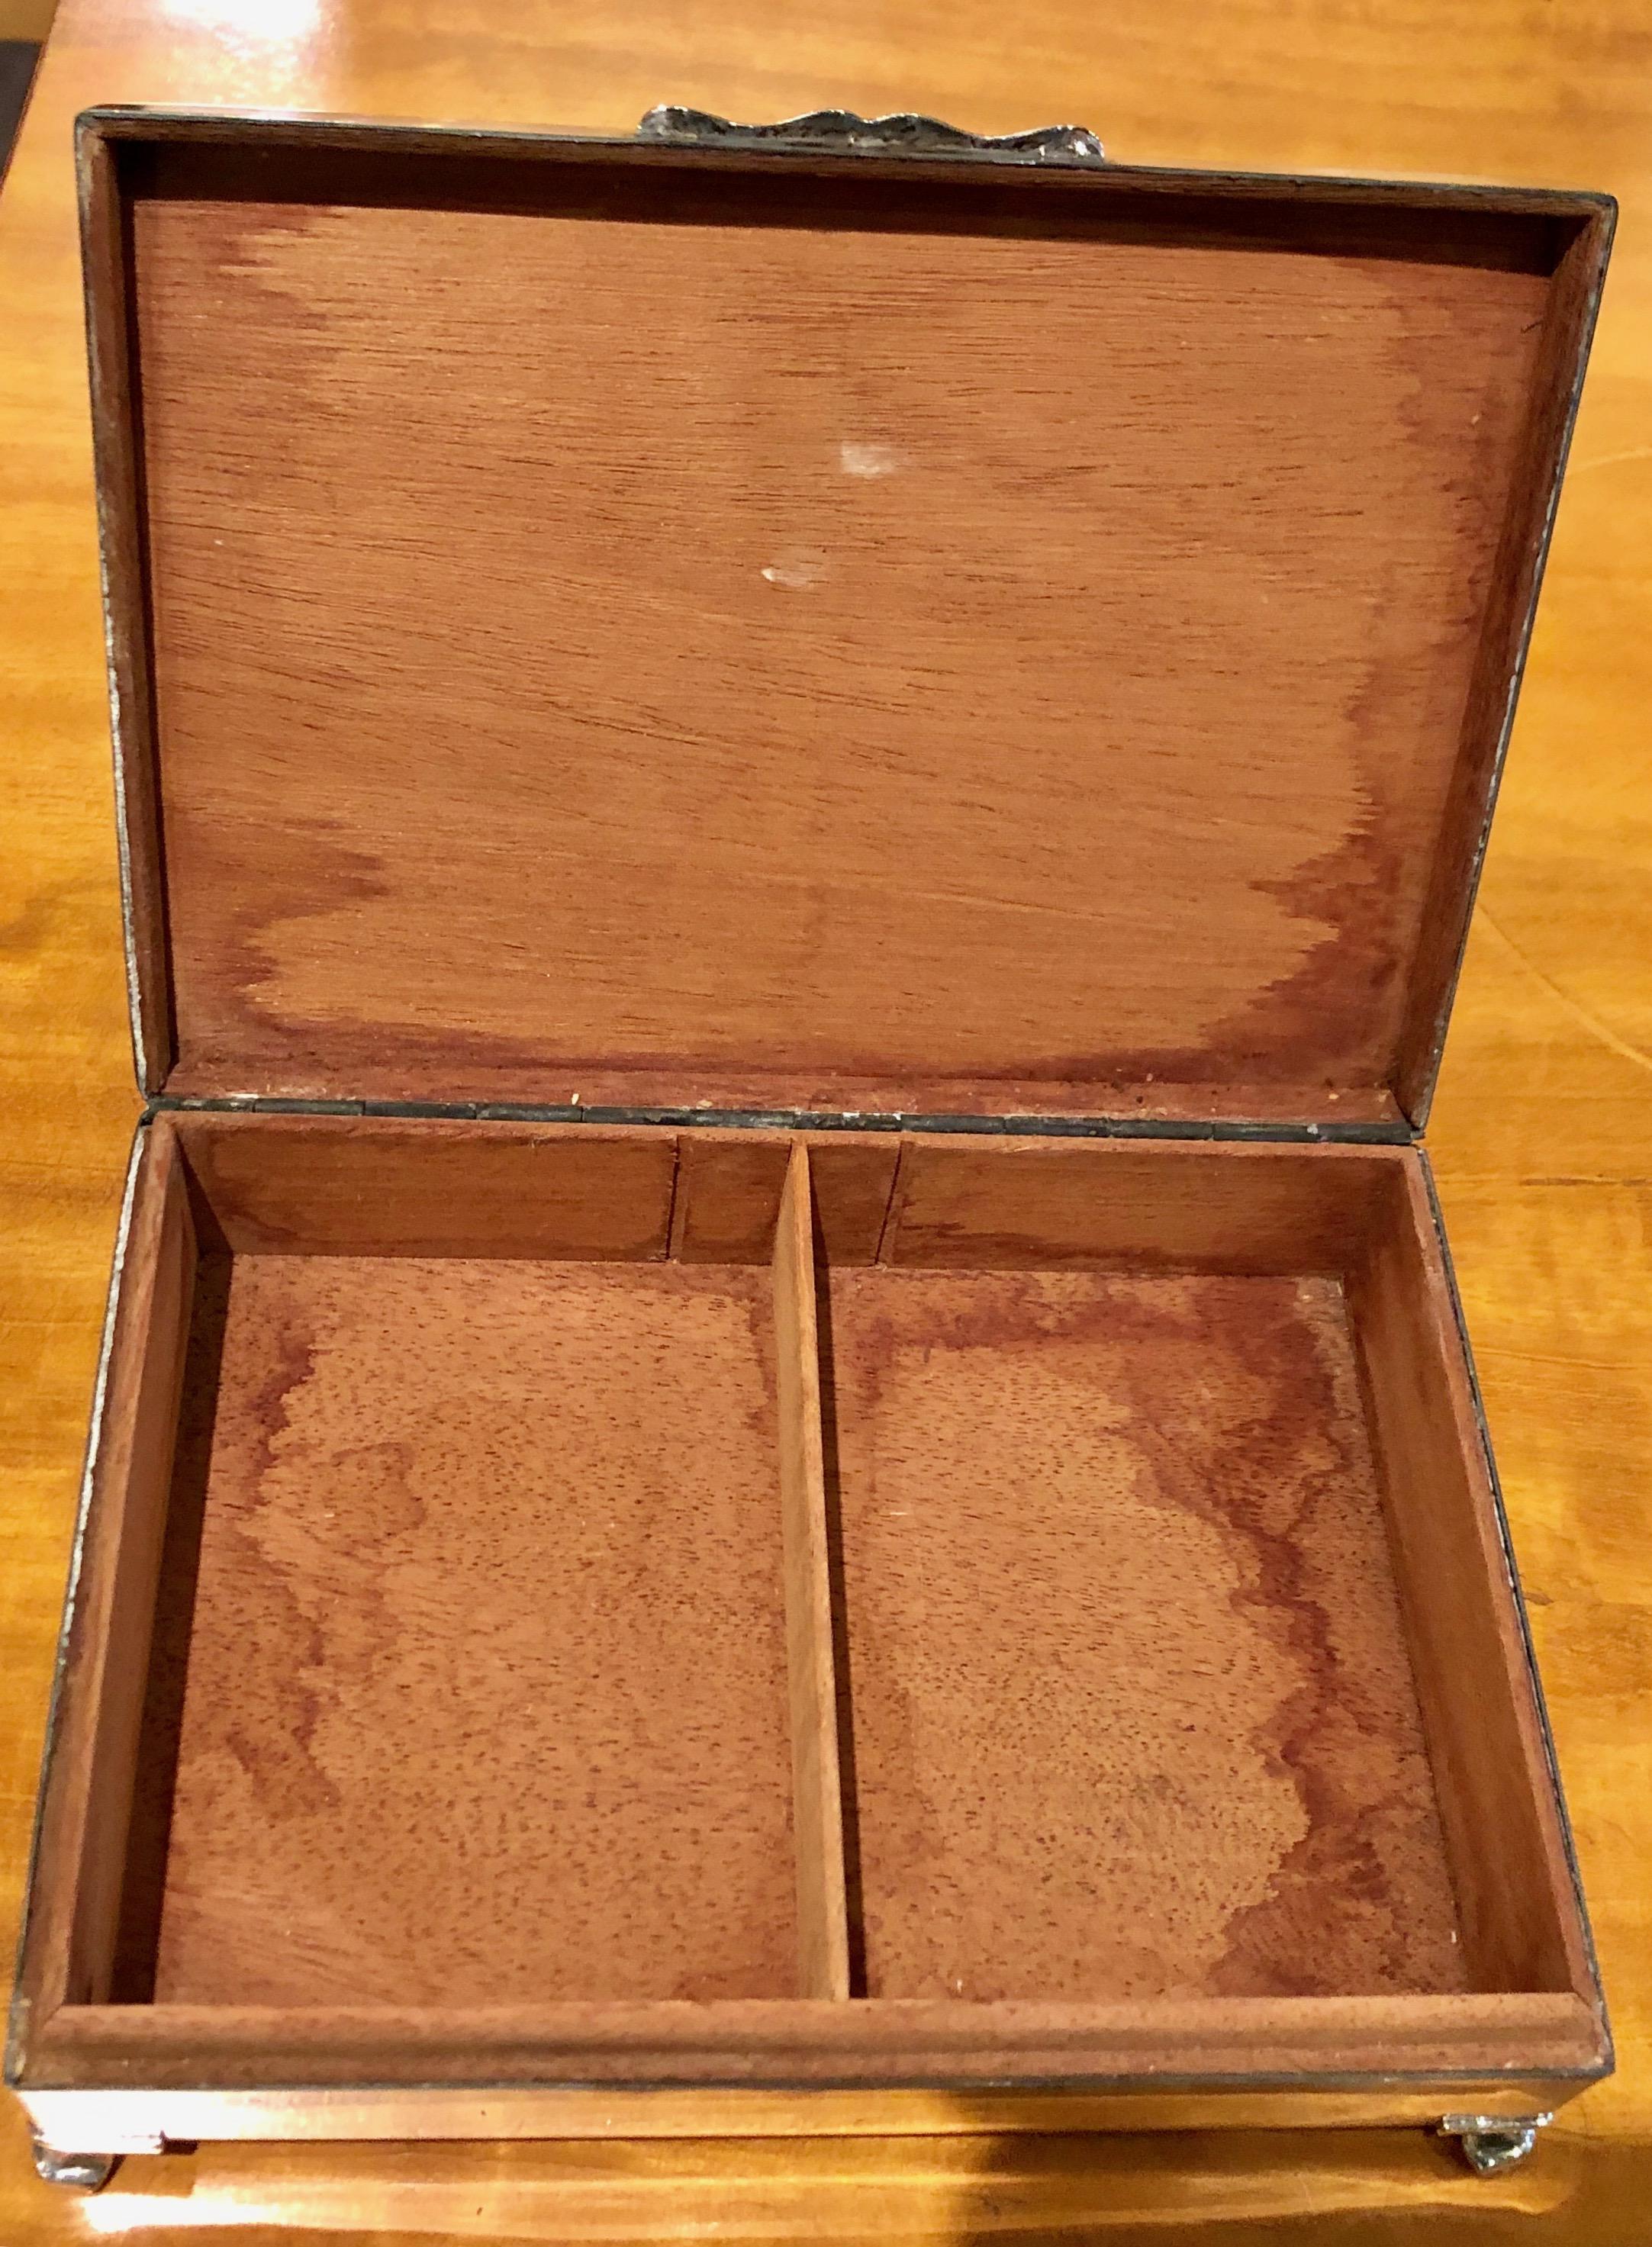 Shagreen English E.P.N.S cigarette or card case. Electro plated nickel silver. Very nice quality, original. Wood interior with compartments. Shagreen is one of the most interesting materials used mainly in European Art Deco as an accent. Shagreen is